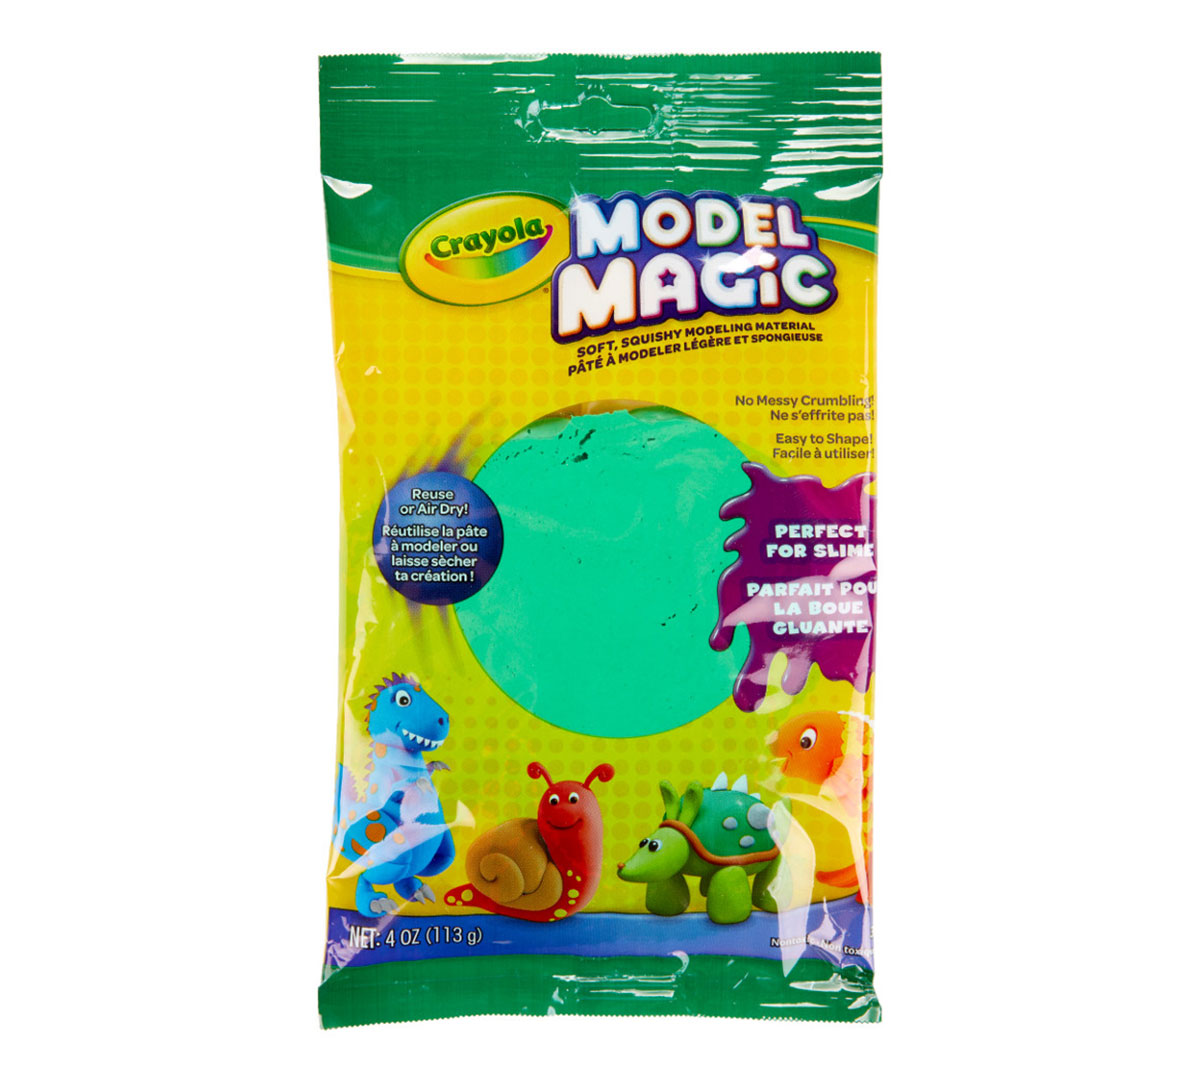 Crayola Bs574401 Model Magic White 4oz for sale online 